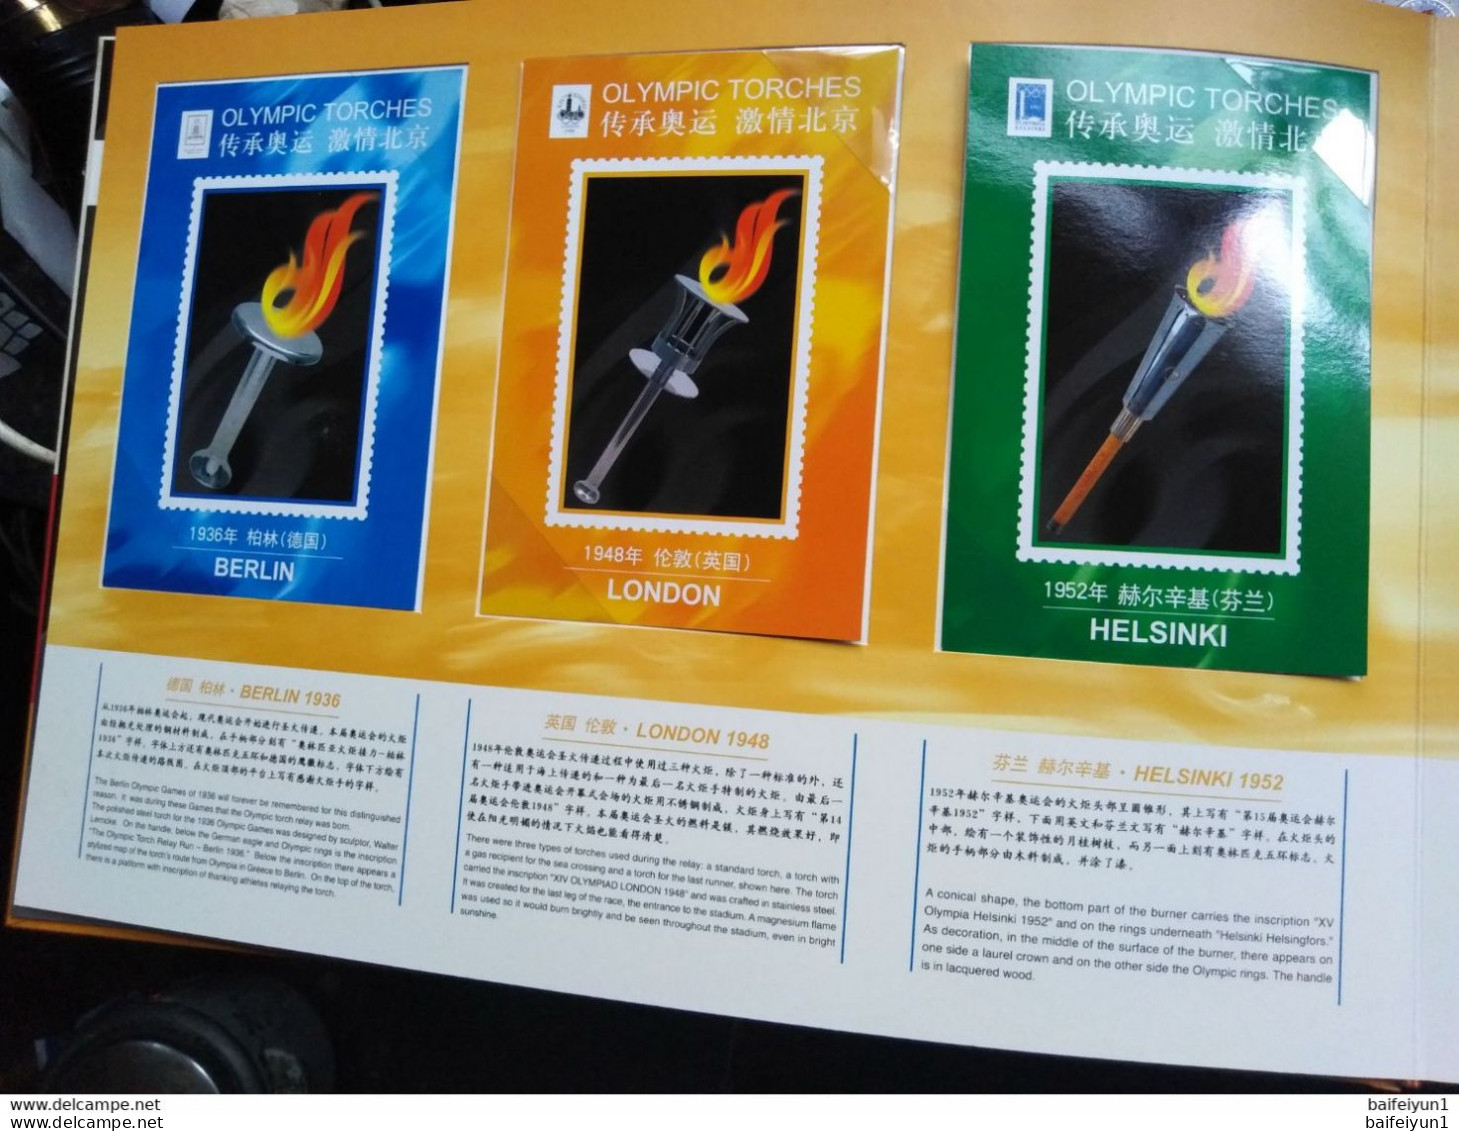 China 2008 Olympic Game Torch From 1936 to 2008 Special sheet album(Rare only 10000)